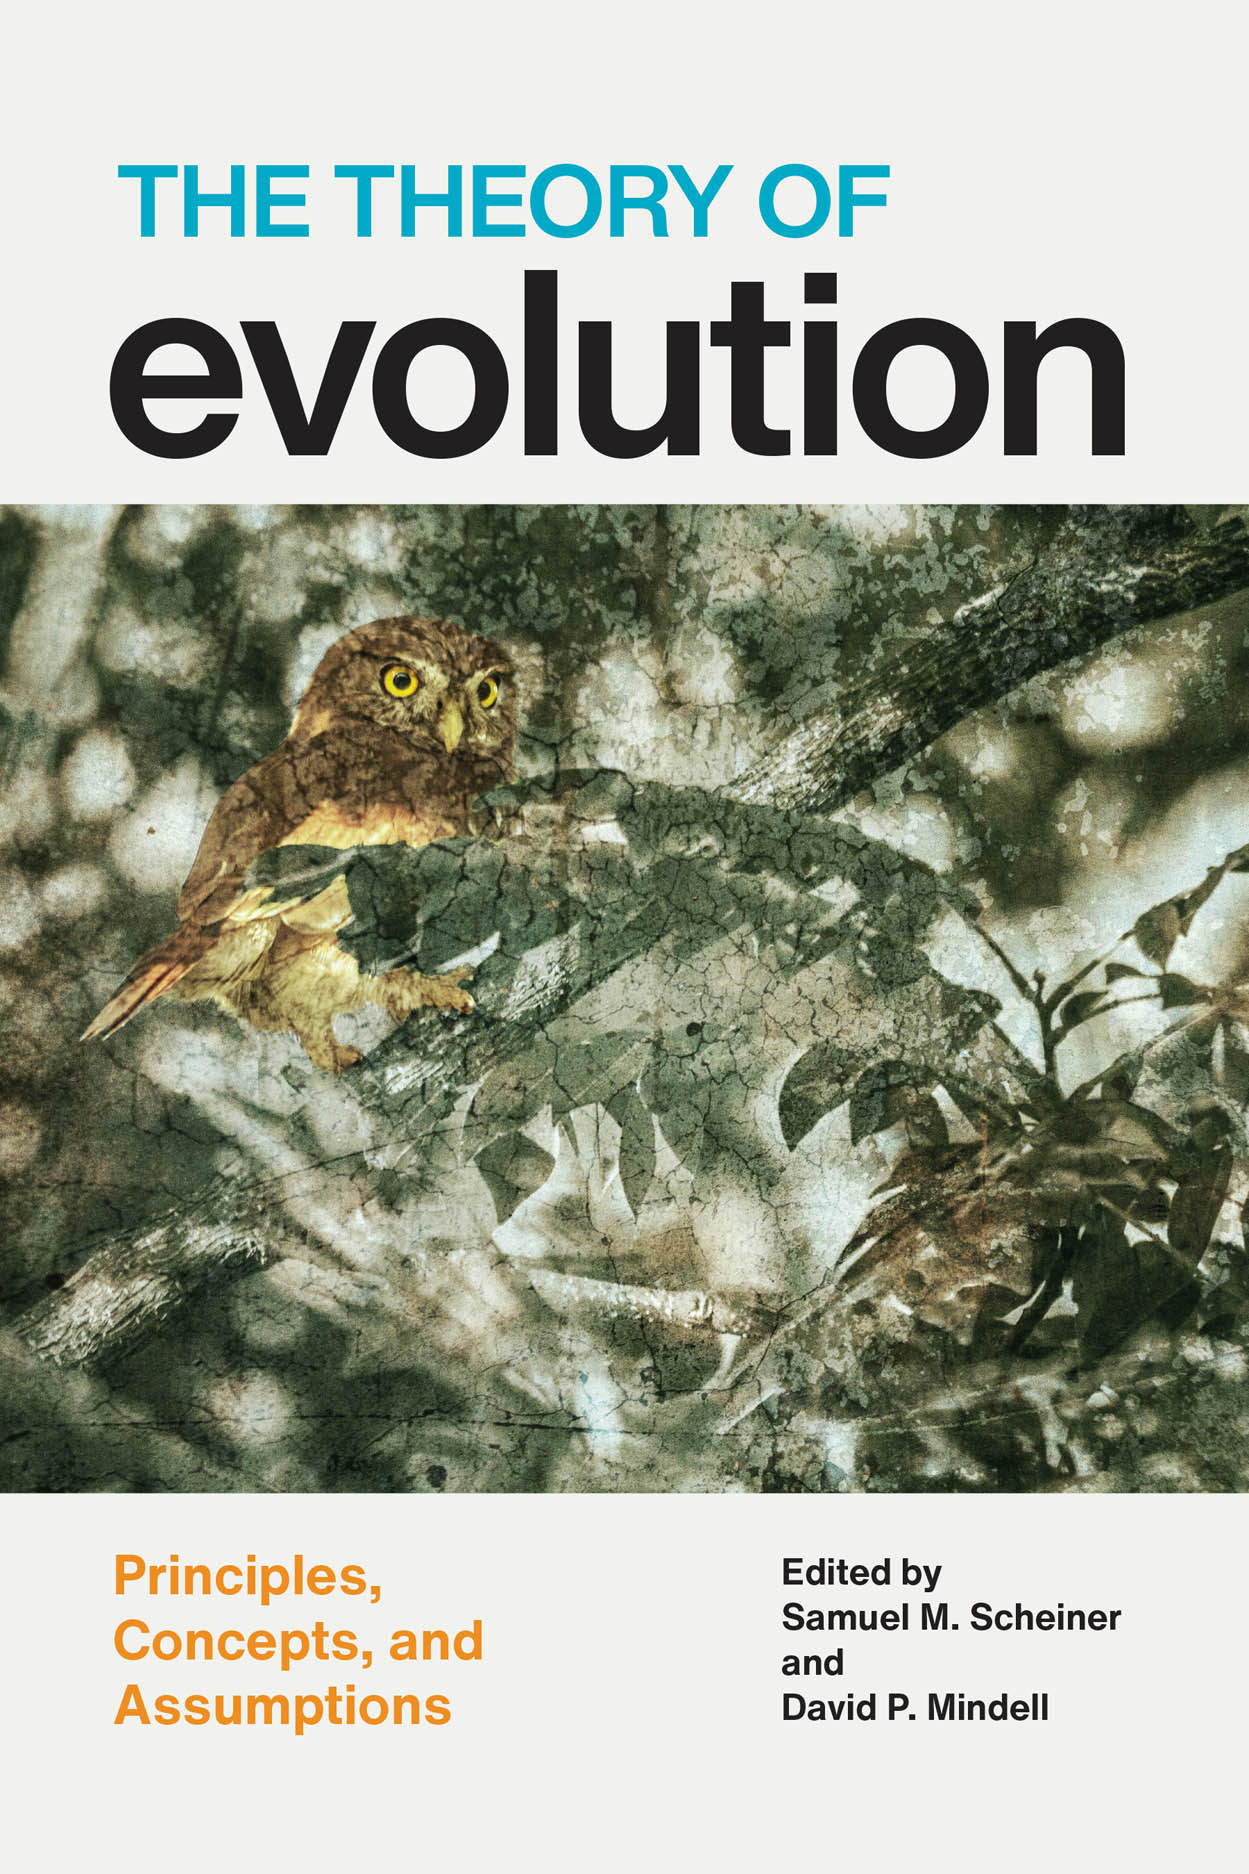 research paper about evolution theory